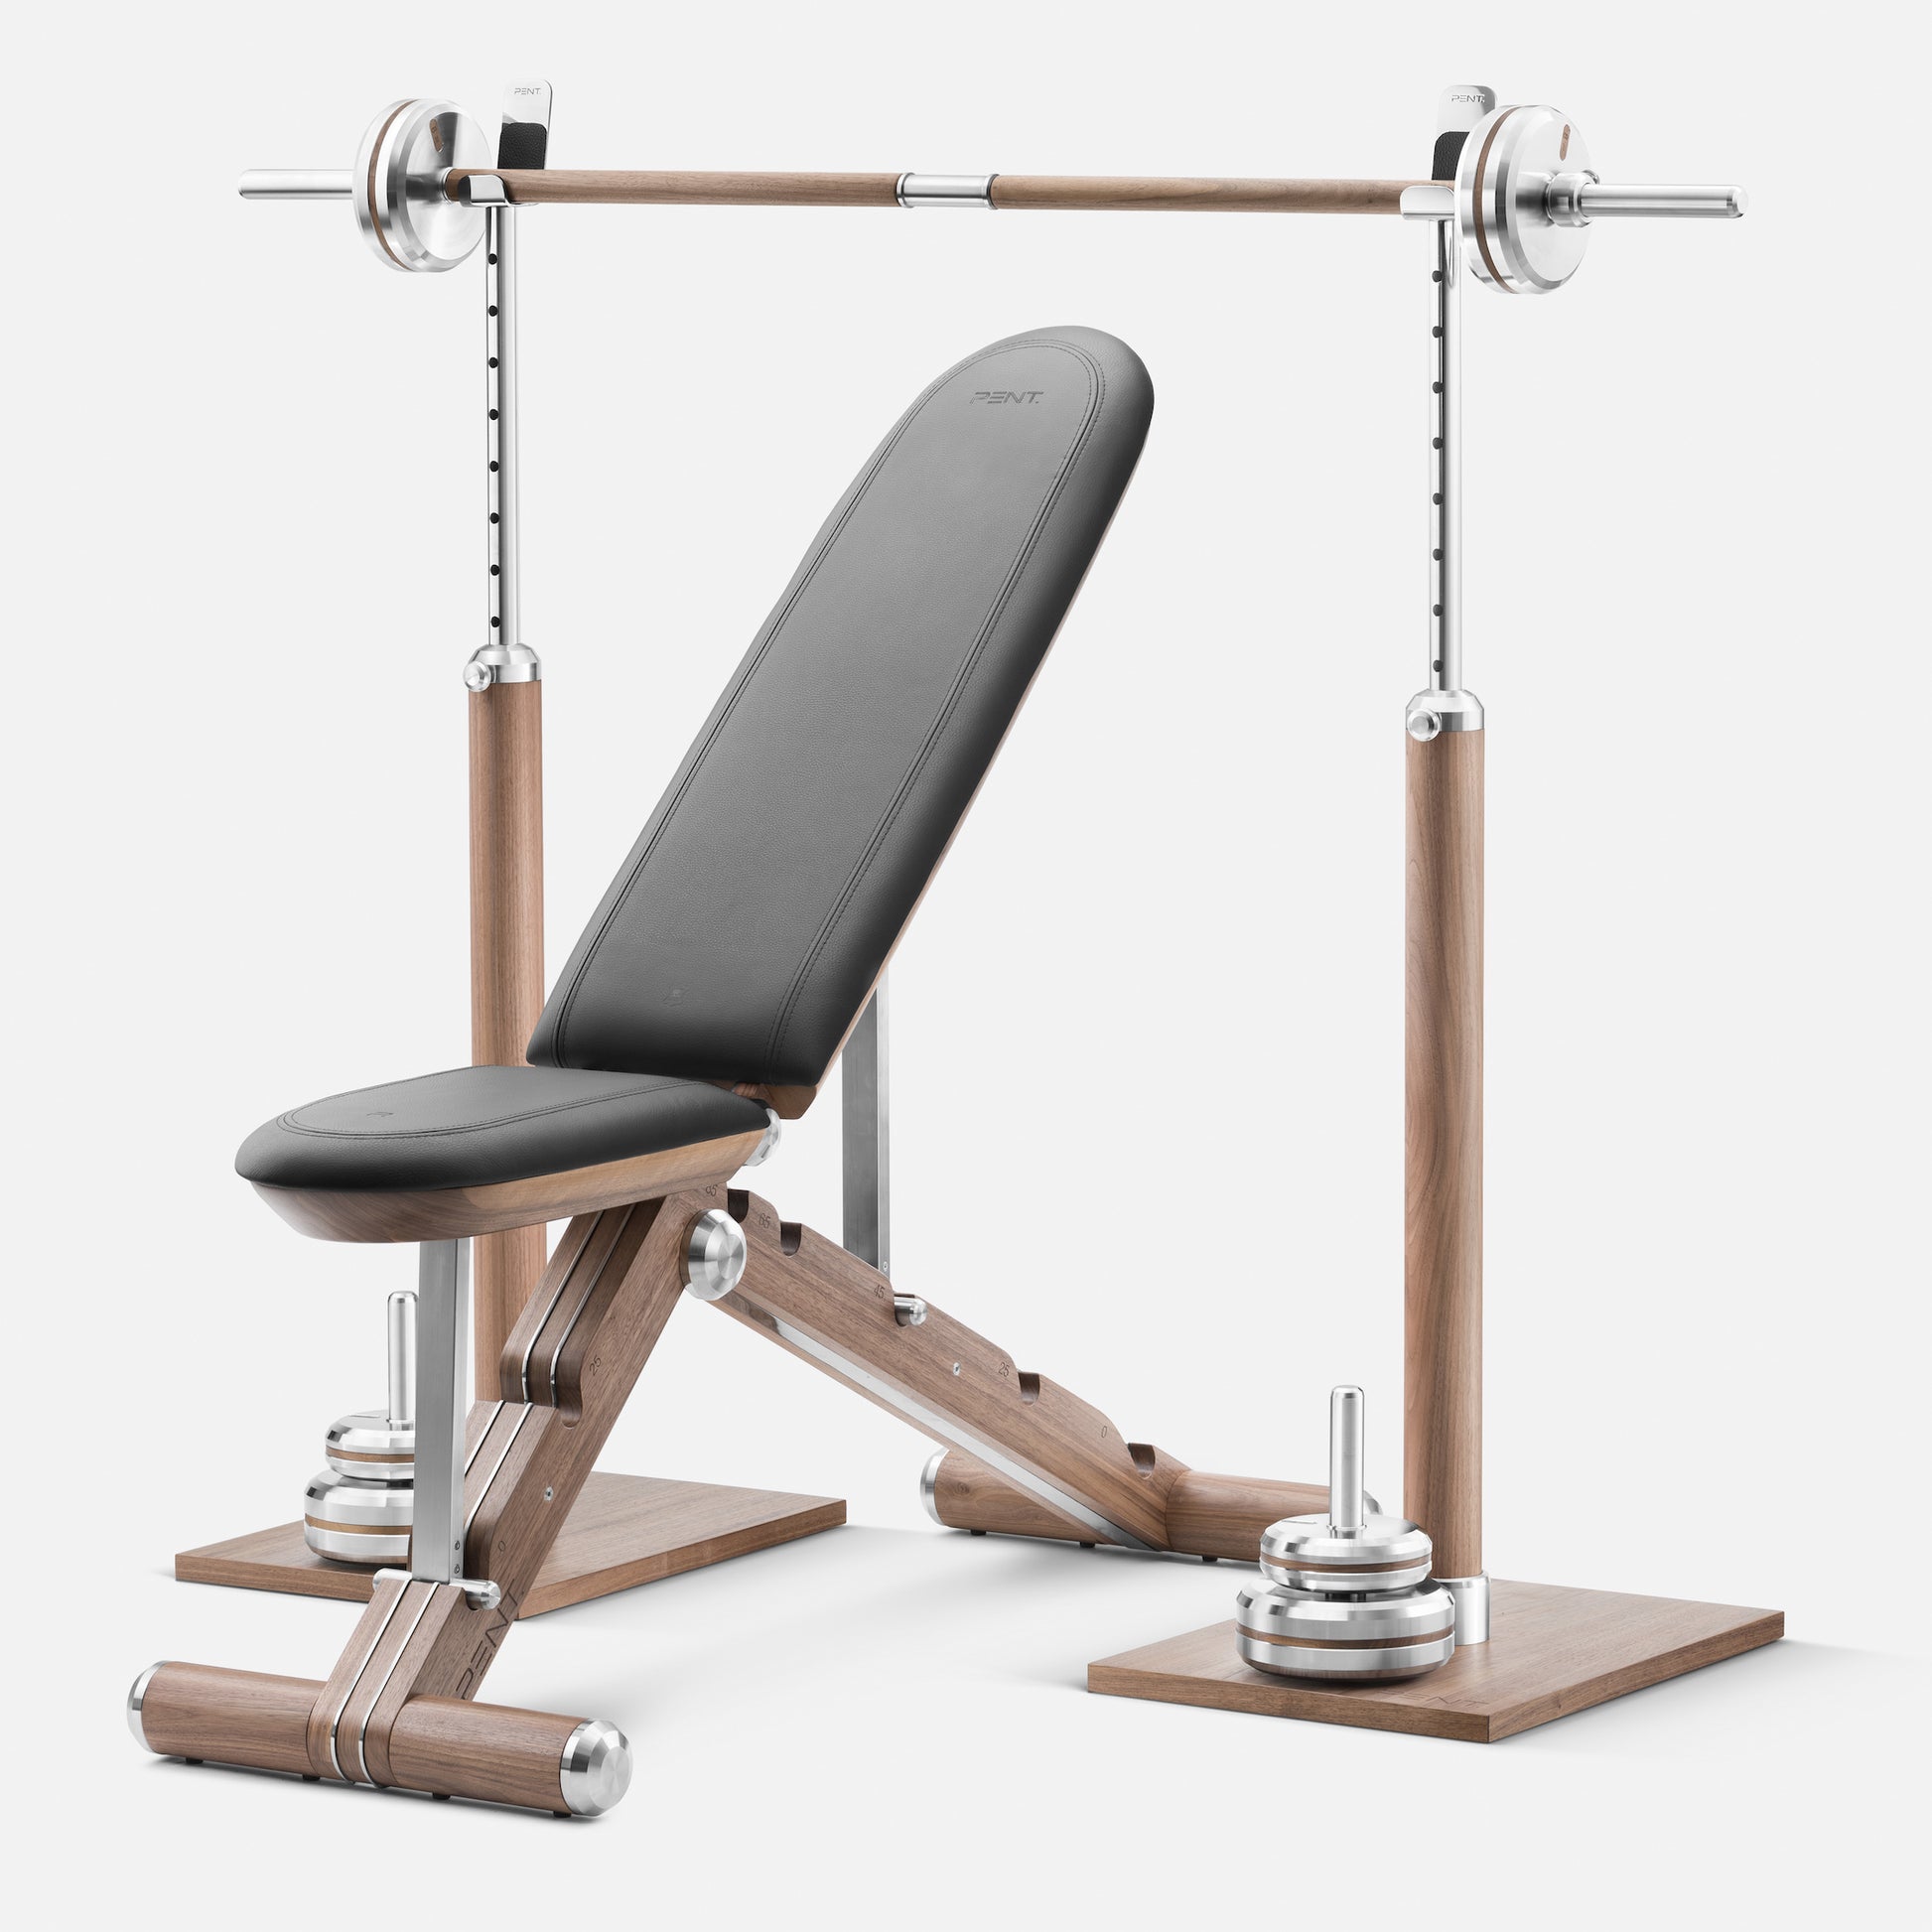 Pent Luxury Fitness Equipment - Customisable bench press set with weights at Cycling Bears